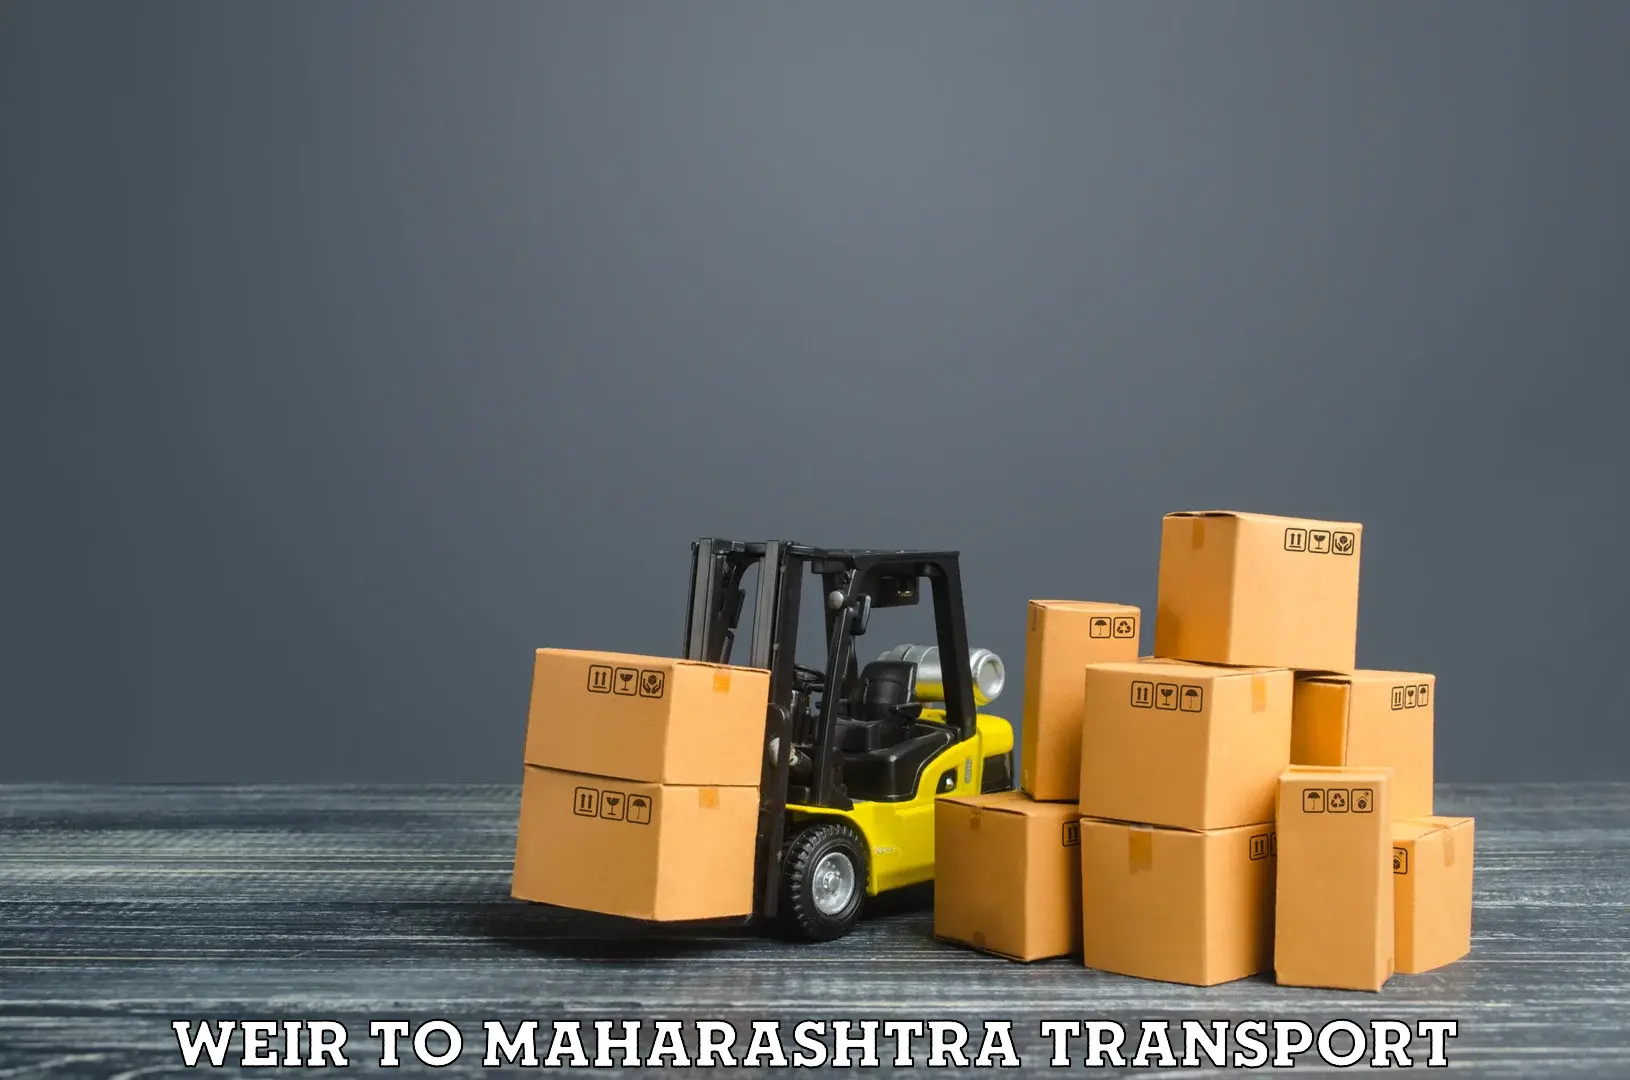 Truck transport companies in India Weir to Baramati